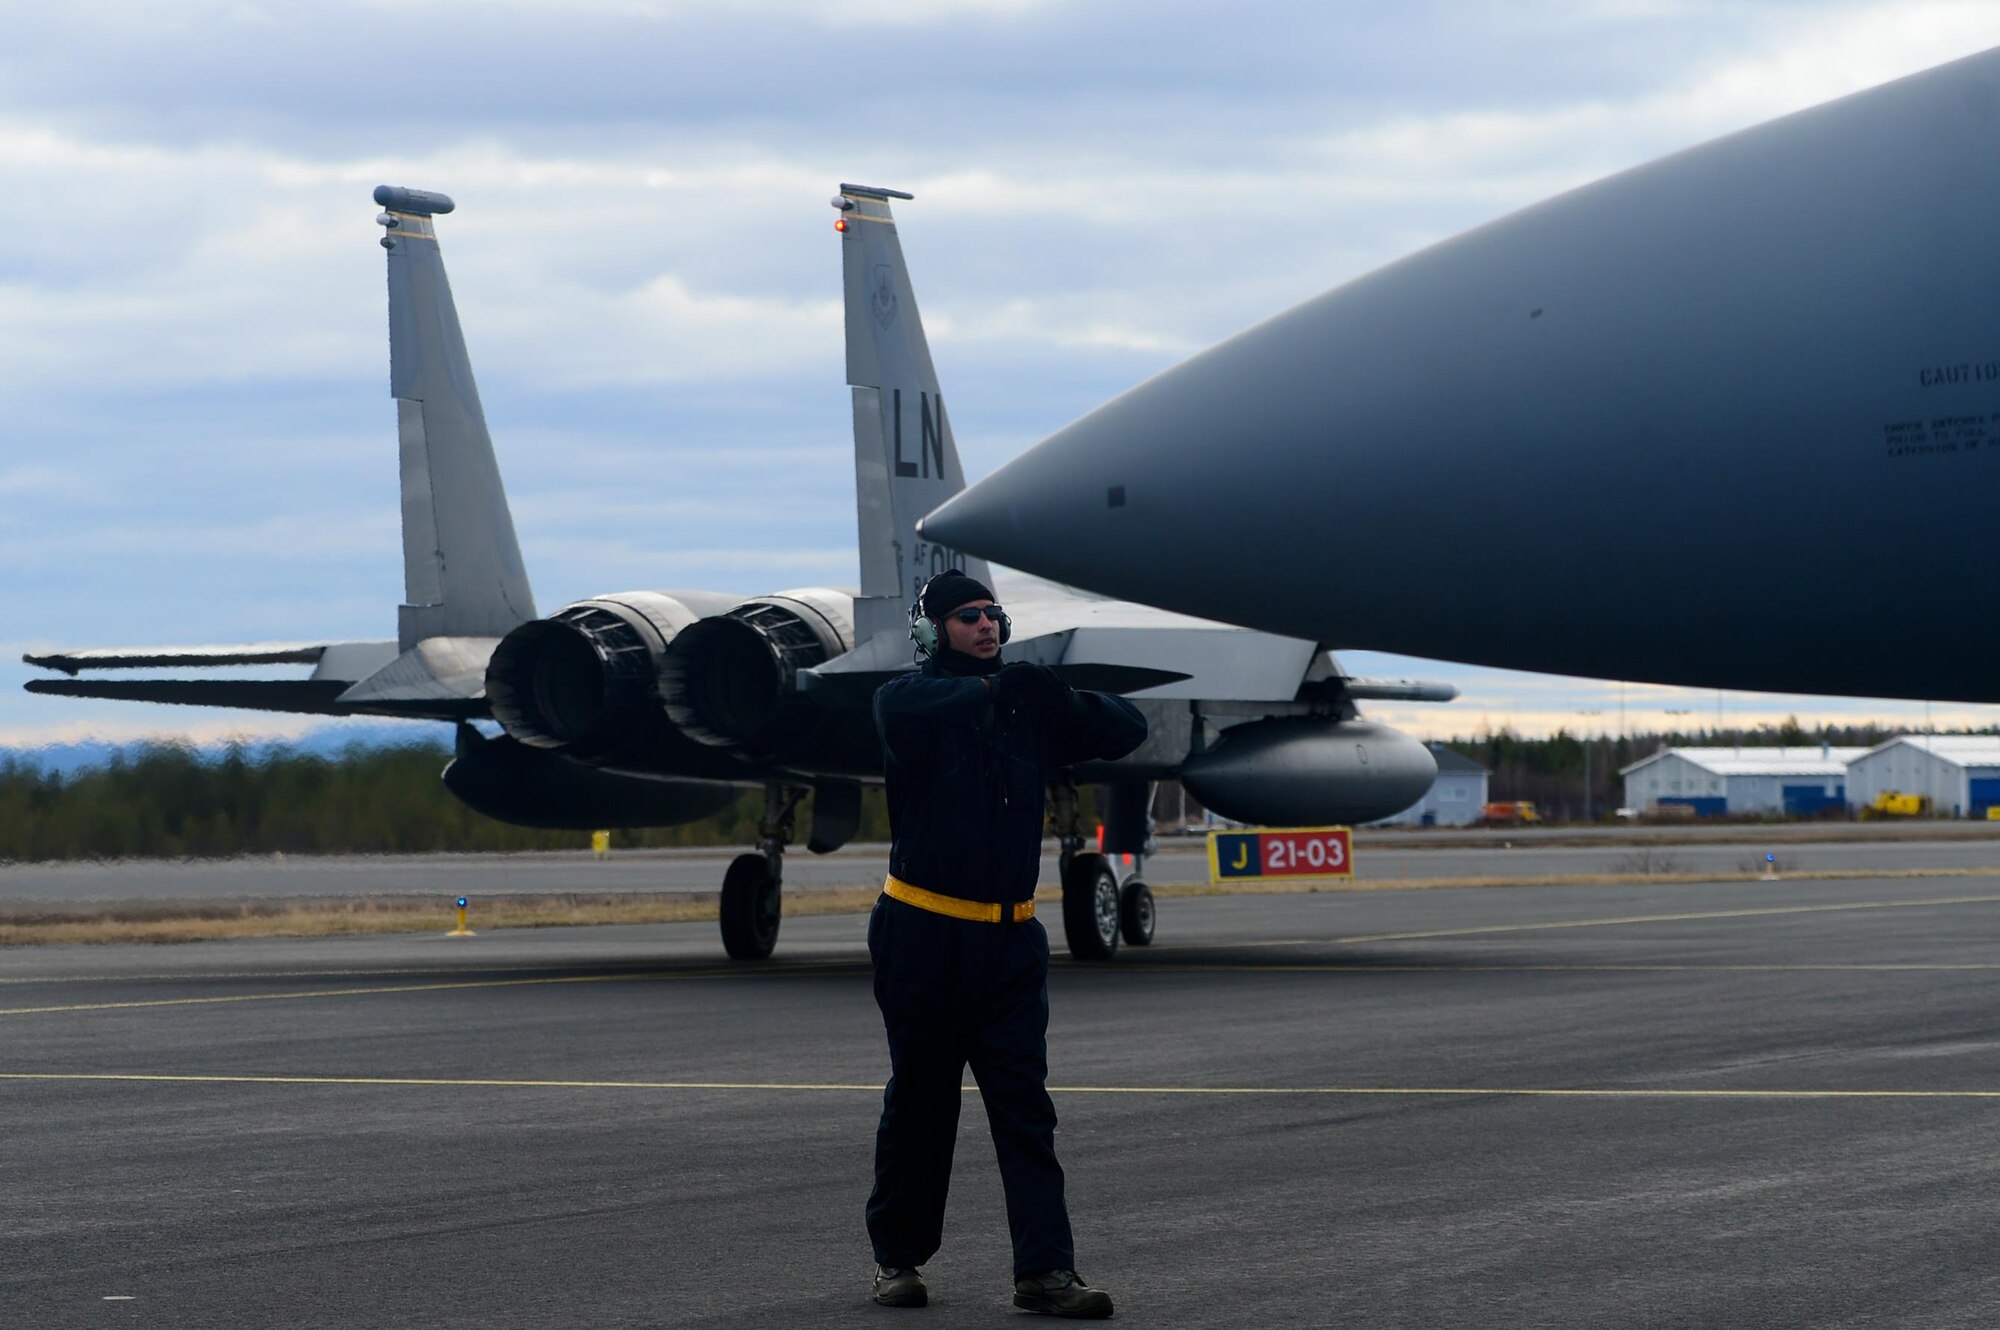 A 493rd Aircraft Maintenance Unit crew chief from Royal Air Force Lakenheath, England, guides an F-15C Eagle onto the taxiway at Rovaniemi Air Base, Finland, May 26, in support of Arctic Challenge 2017. Through exercises like ACE 17, the U.S., allies and partner nations are able to train together in a realistic environment, working to ensure security, protect global interests and strengthen economic bonds in Europe. (U.S. Air Force photo/Airman 1st Class Abby L. Finkel)